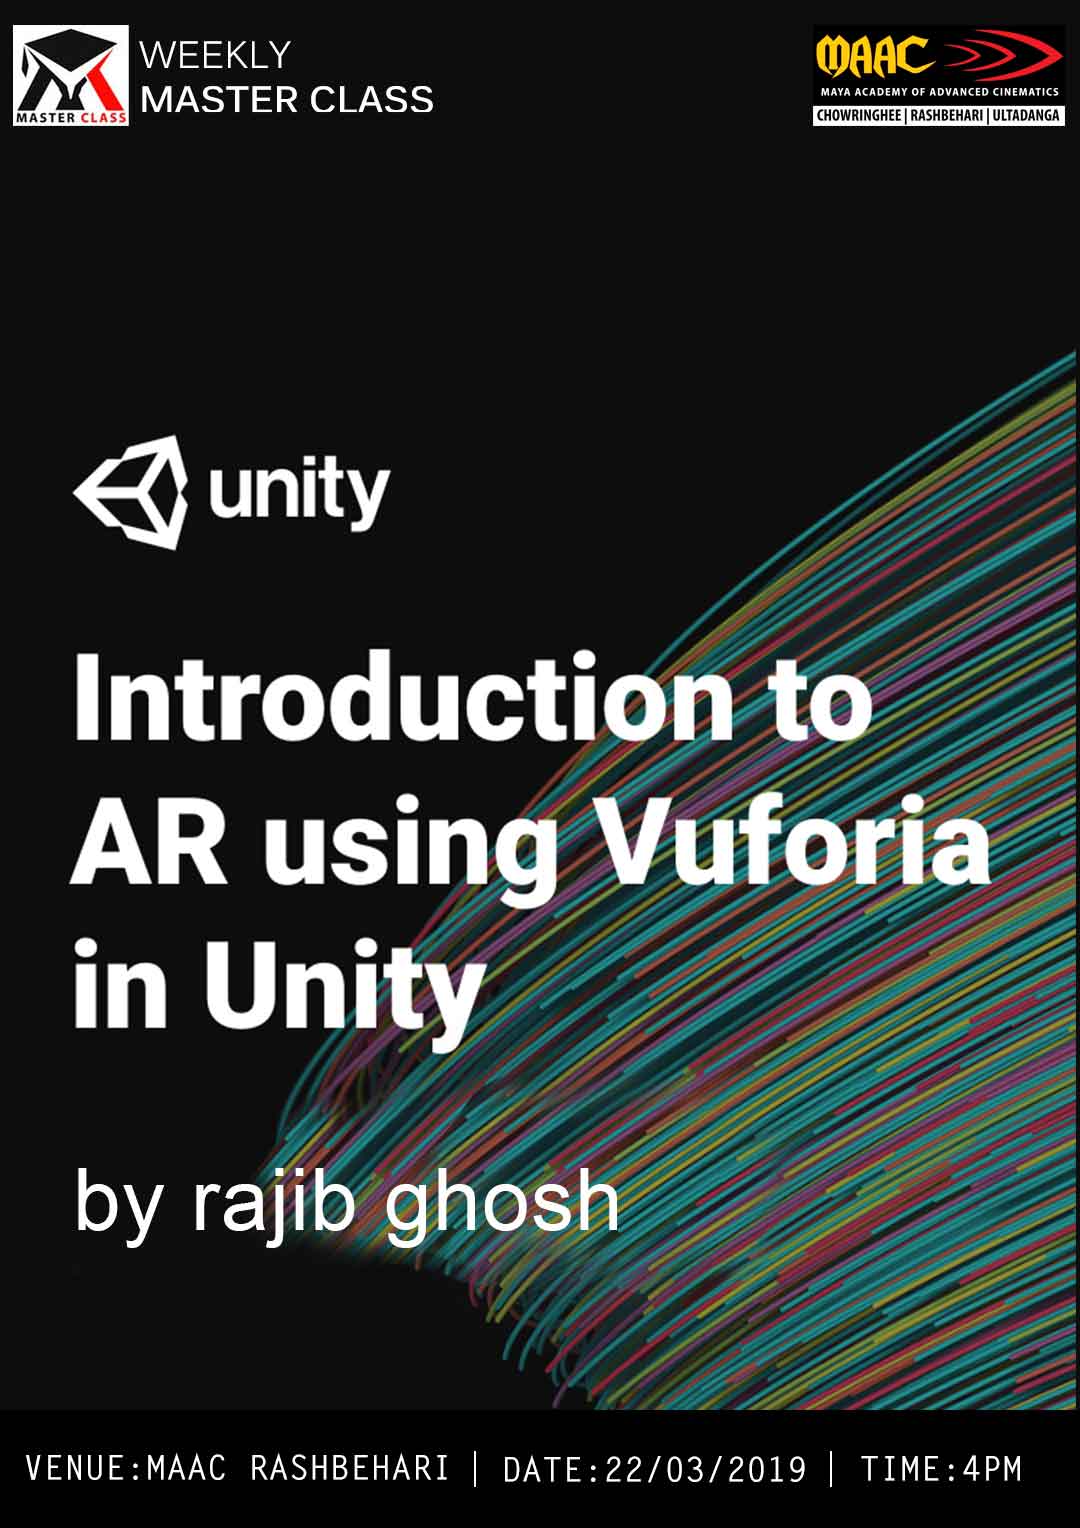 Weekly Master Class on Introduction to AR using Vuforia in Unity